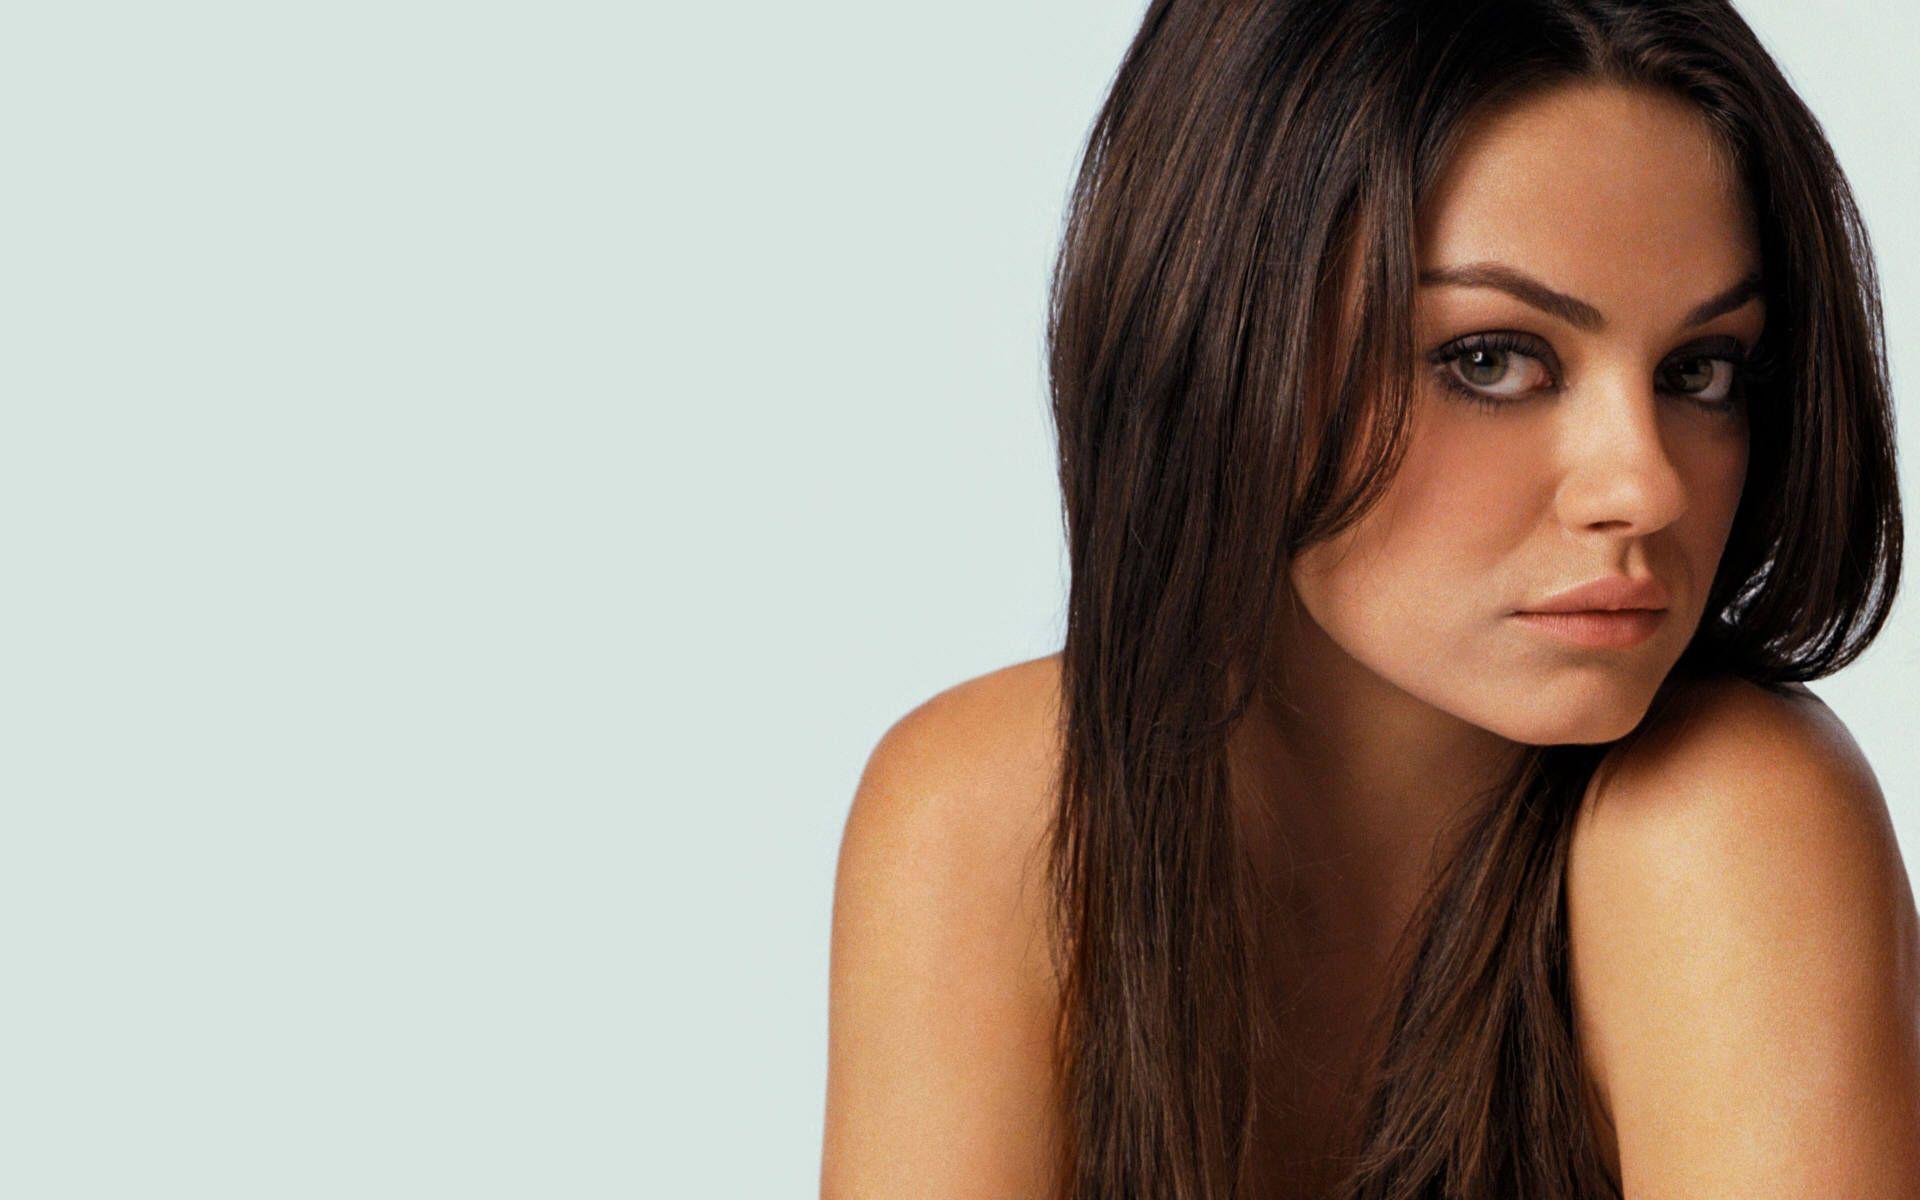 Mila Kunis Wallpapers Hd Wallpaper Cave 40248 Hot Sex Picture